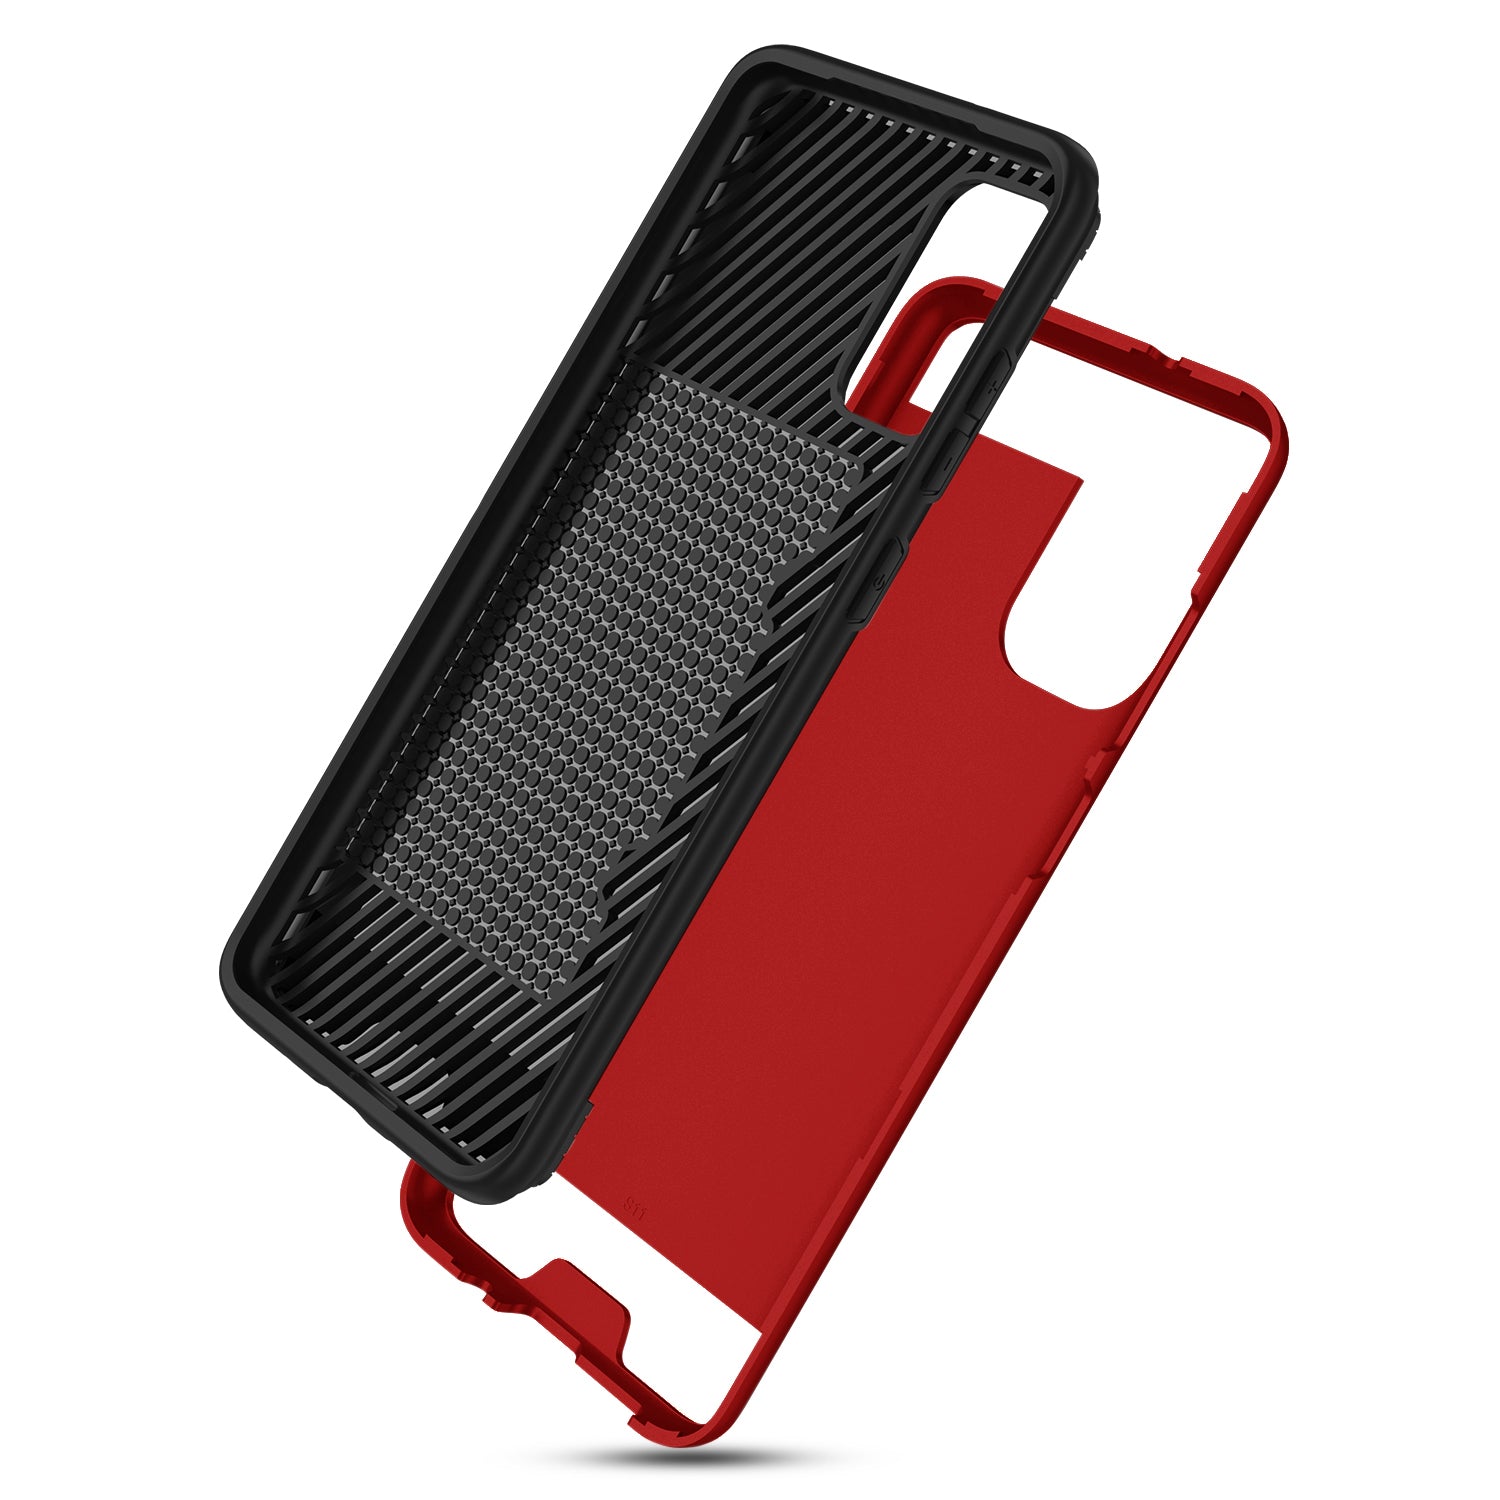 REIKO SAMSUNG GALAXY S20 PLUS SLIM ARMOR HYBRID CASE WITH CARD HOLDER IN RED